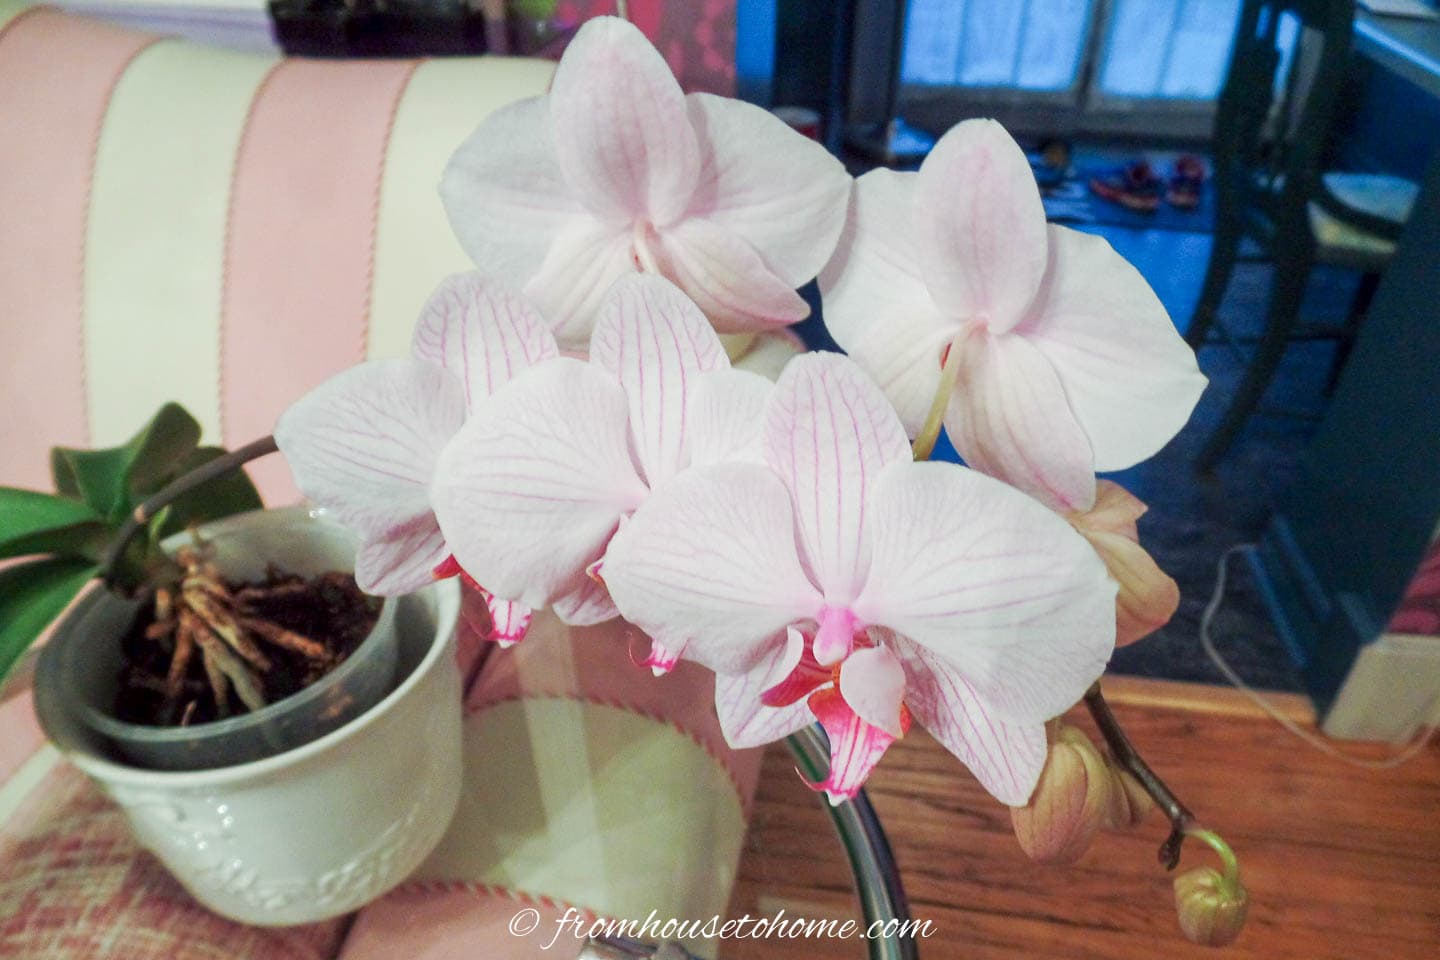 Pink Phalaenopsis orchid growing in a pot on a glass table